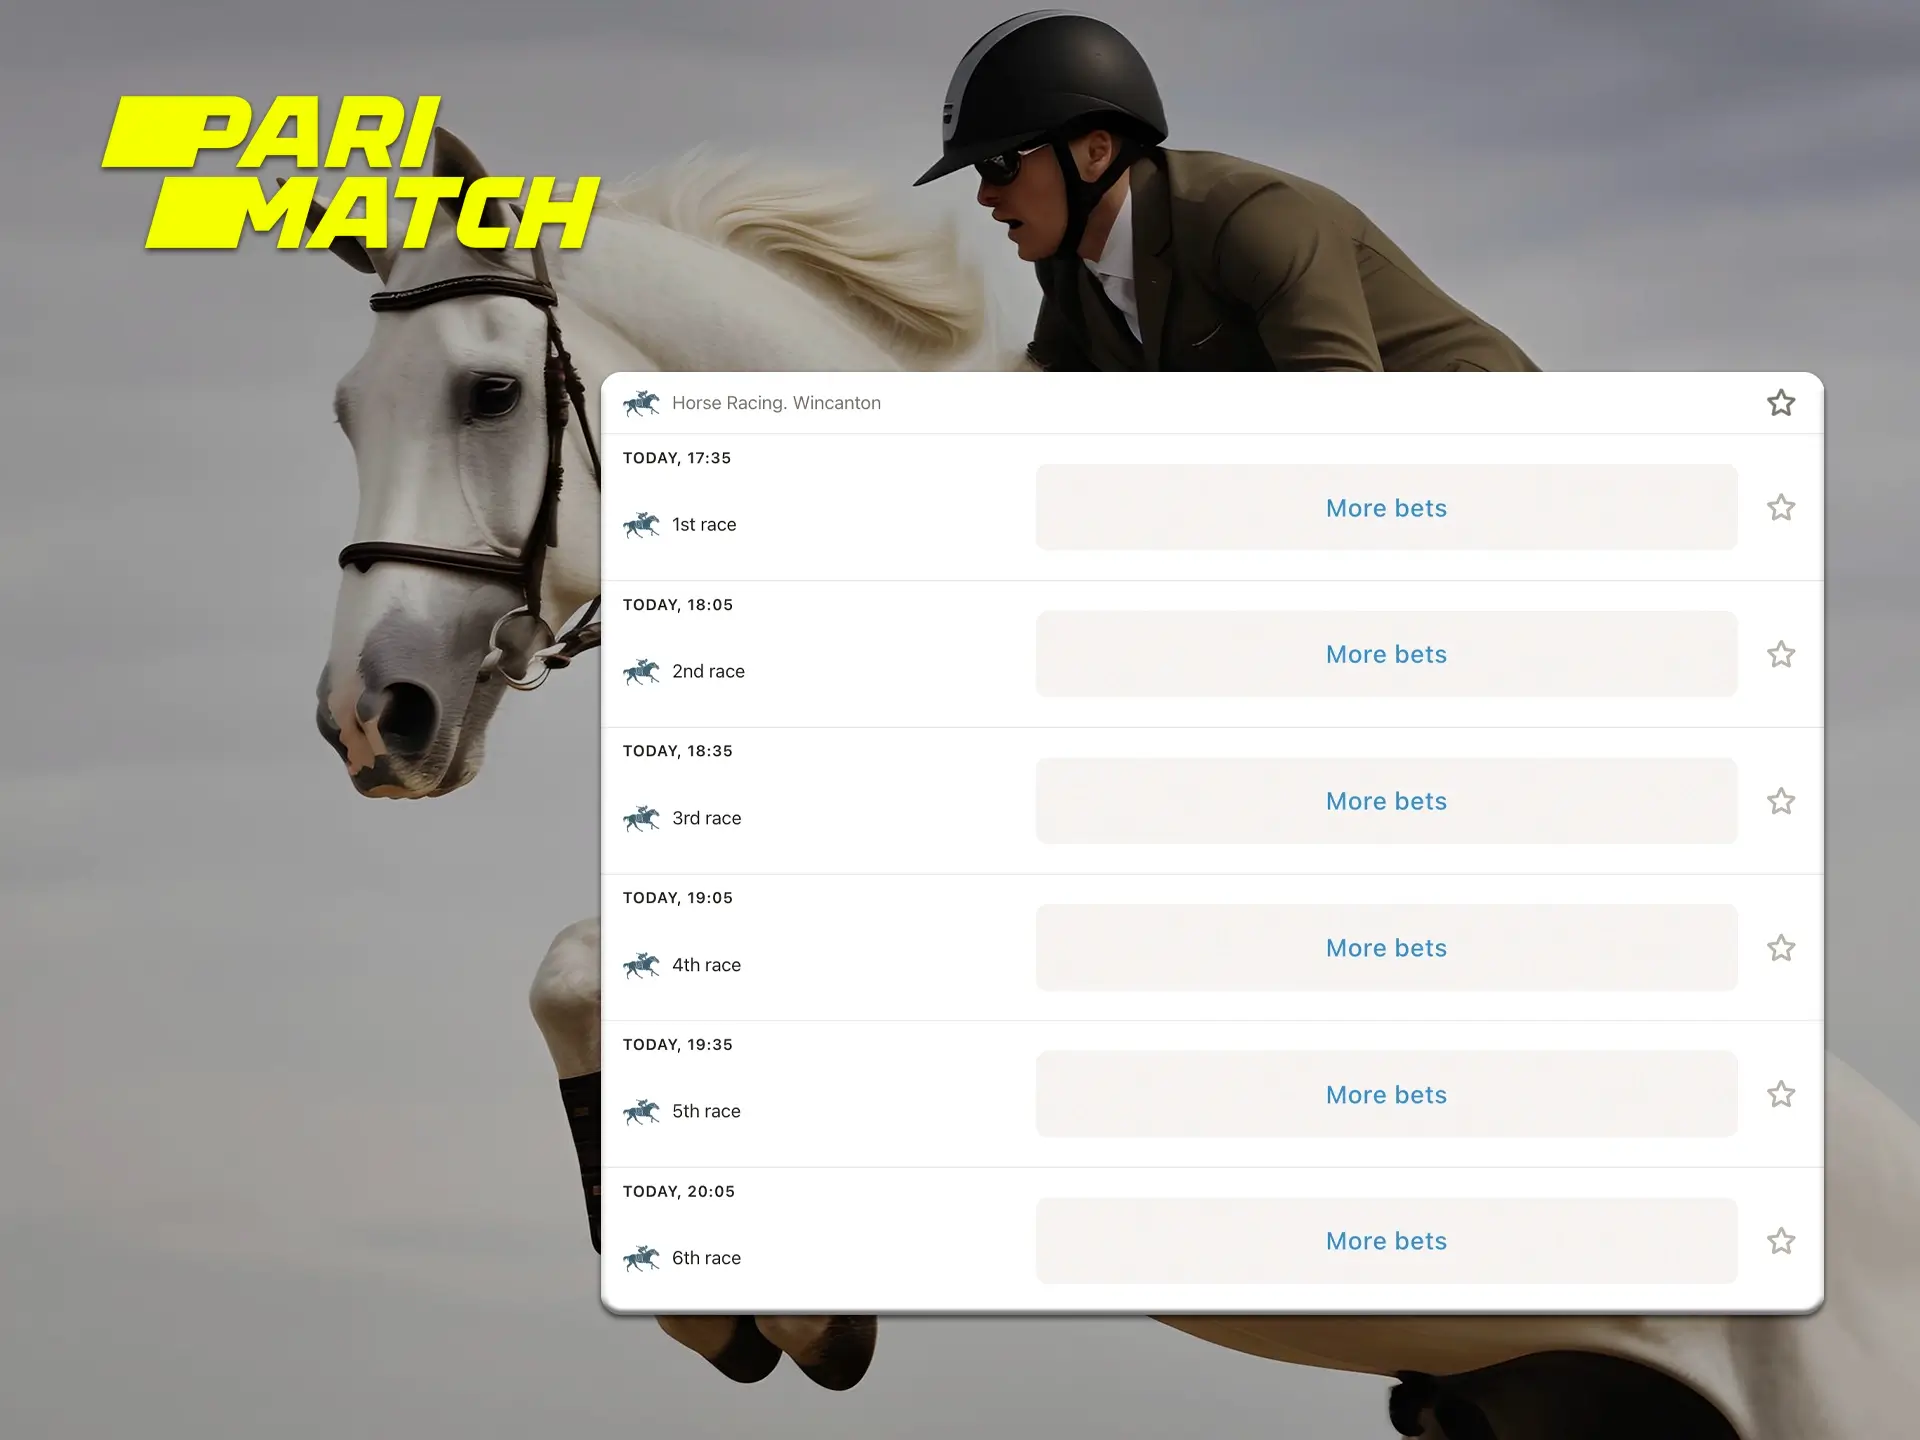 The Parimatch bookmaker website is great for betting on horse racing.